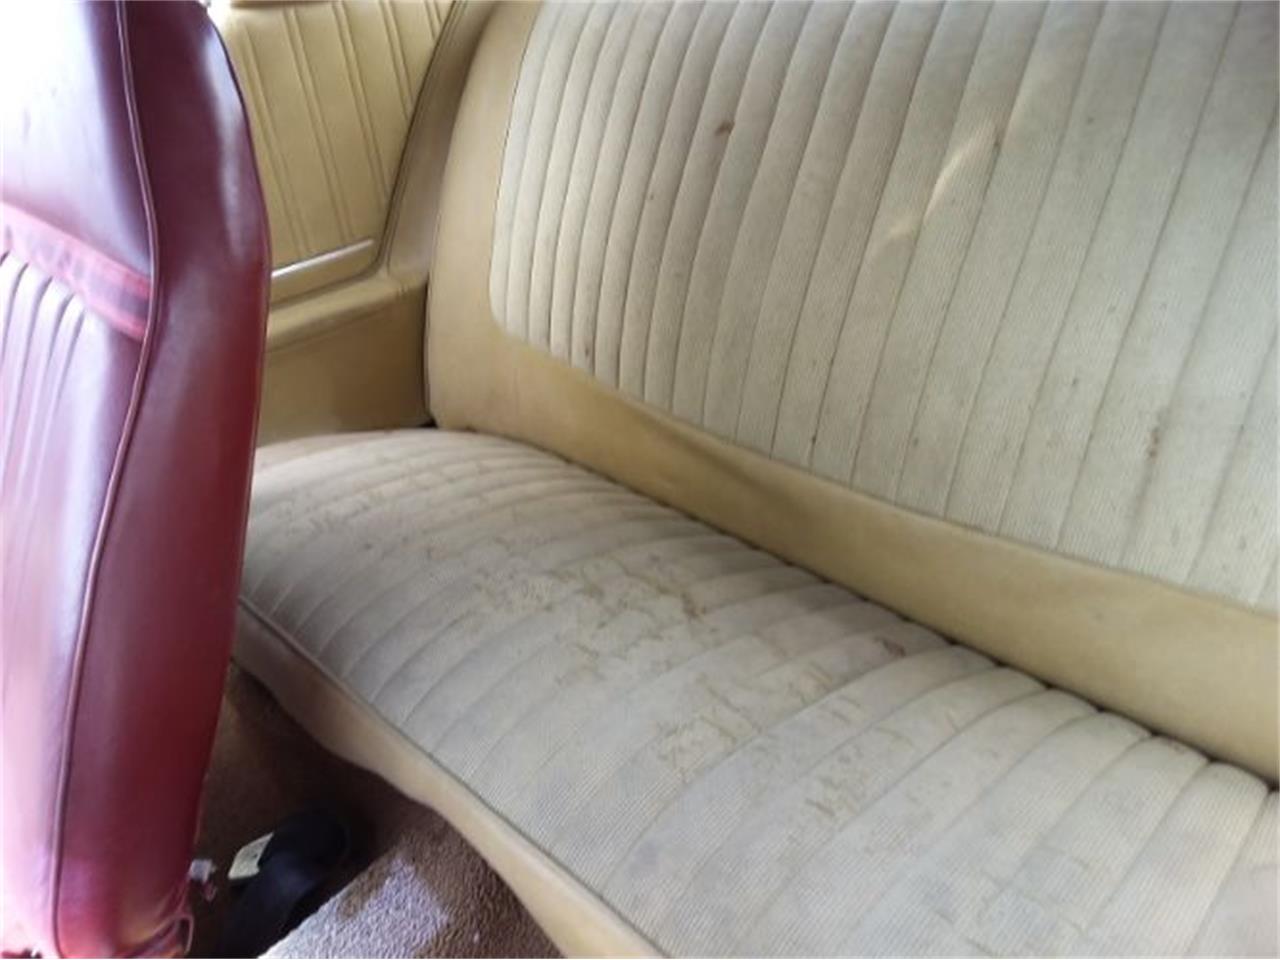 1973 Plymouth Satellite for sale in Cadillac, MI – photo 8